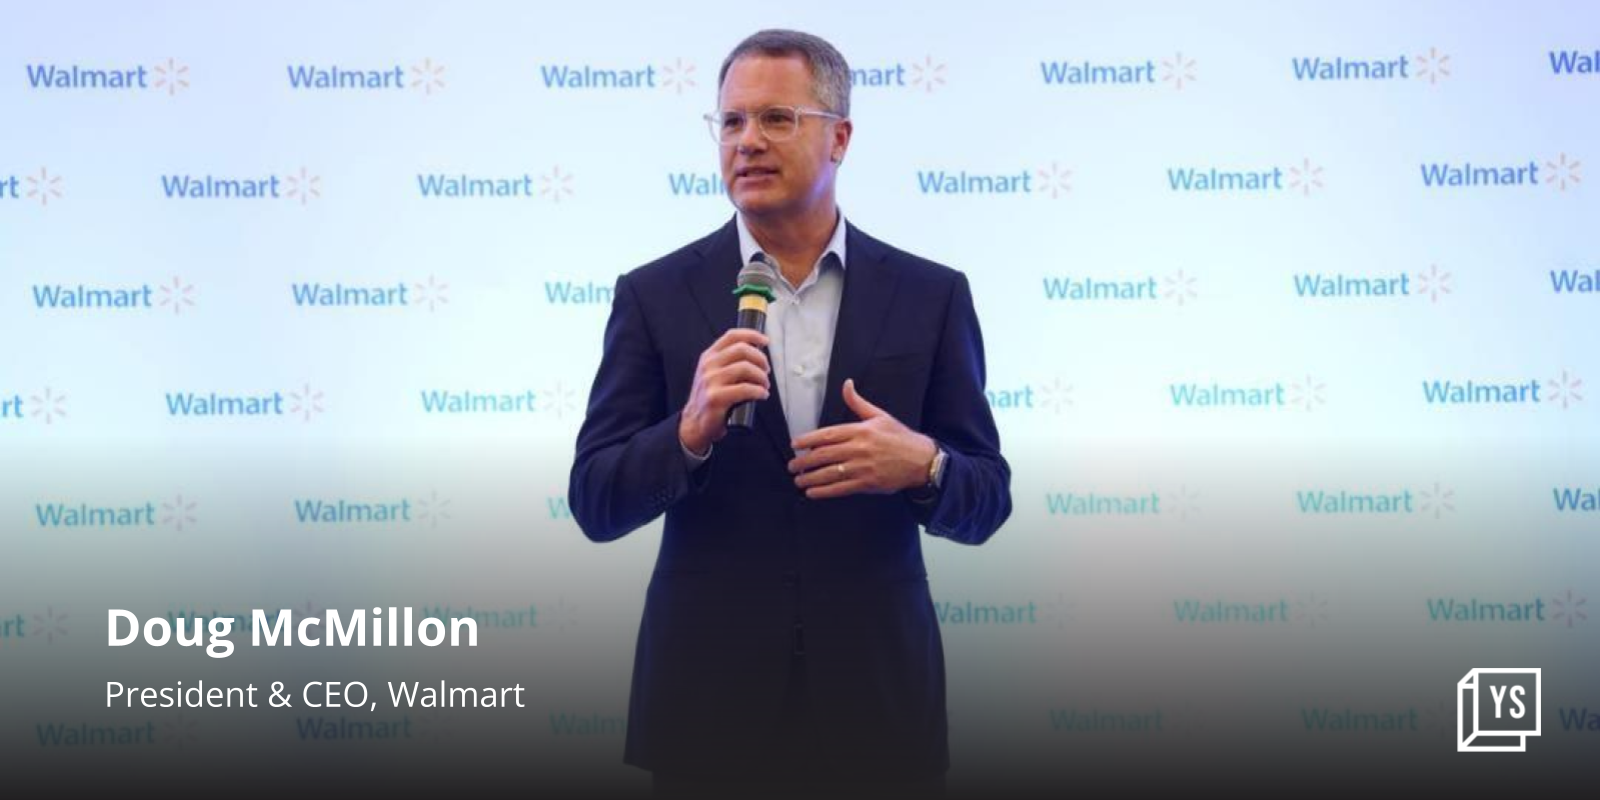 Walmart reiterates annual export goal of $10B from India by 2027

